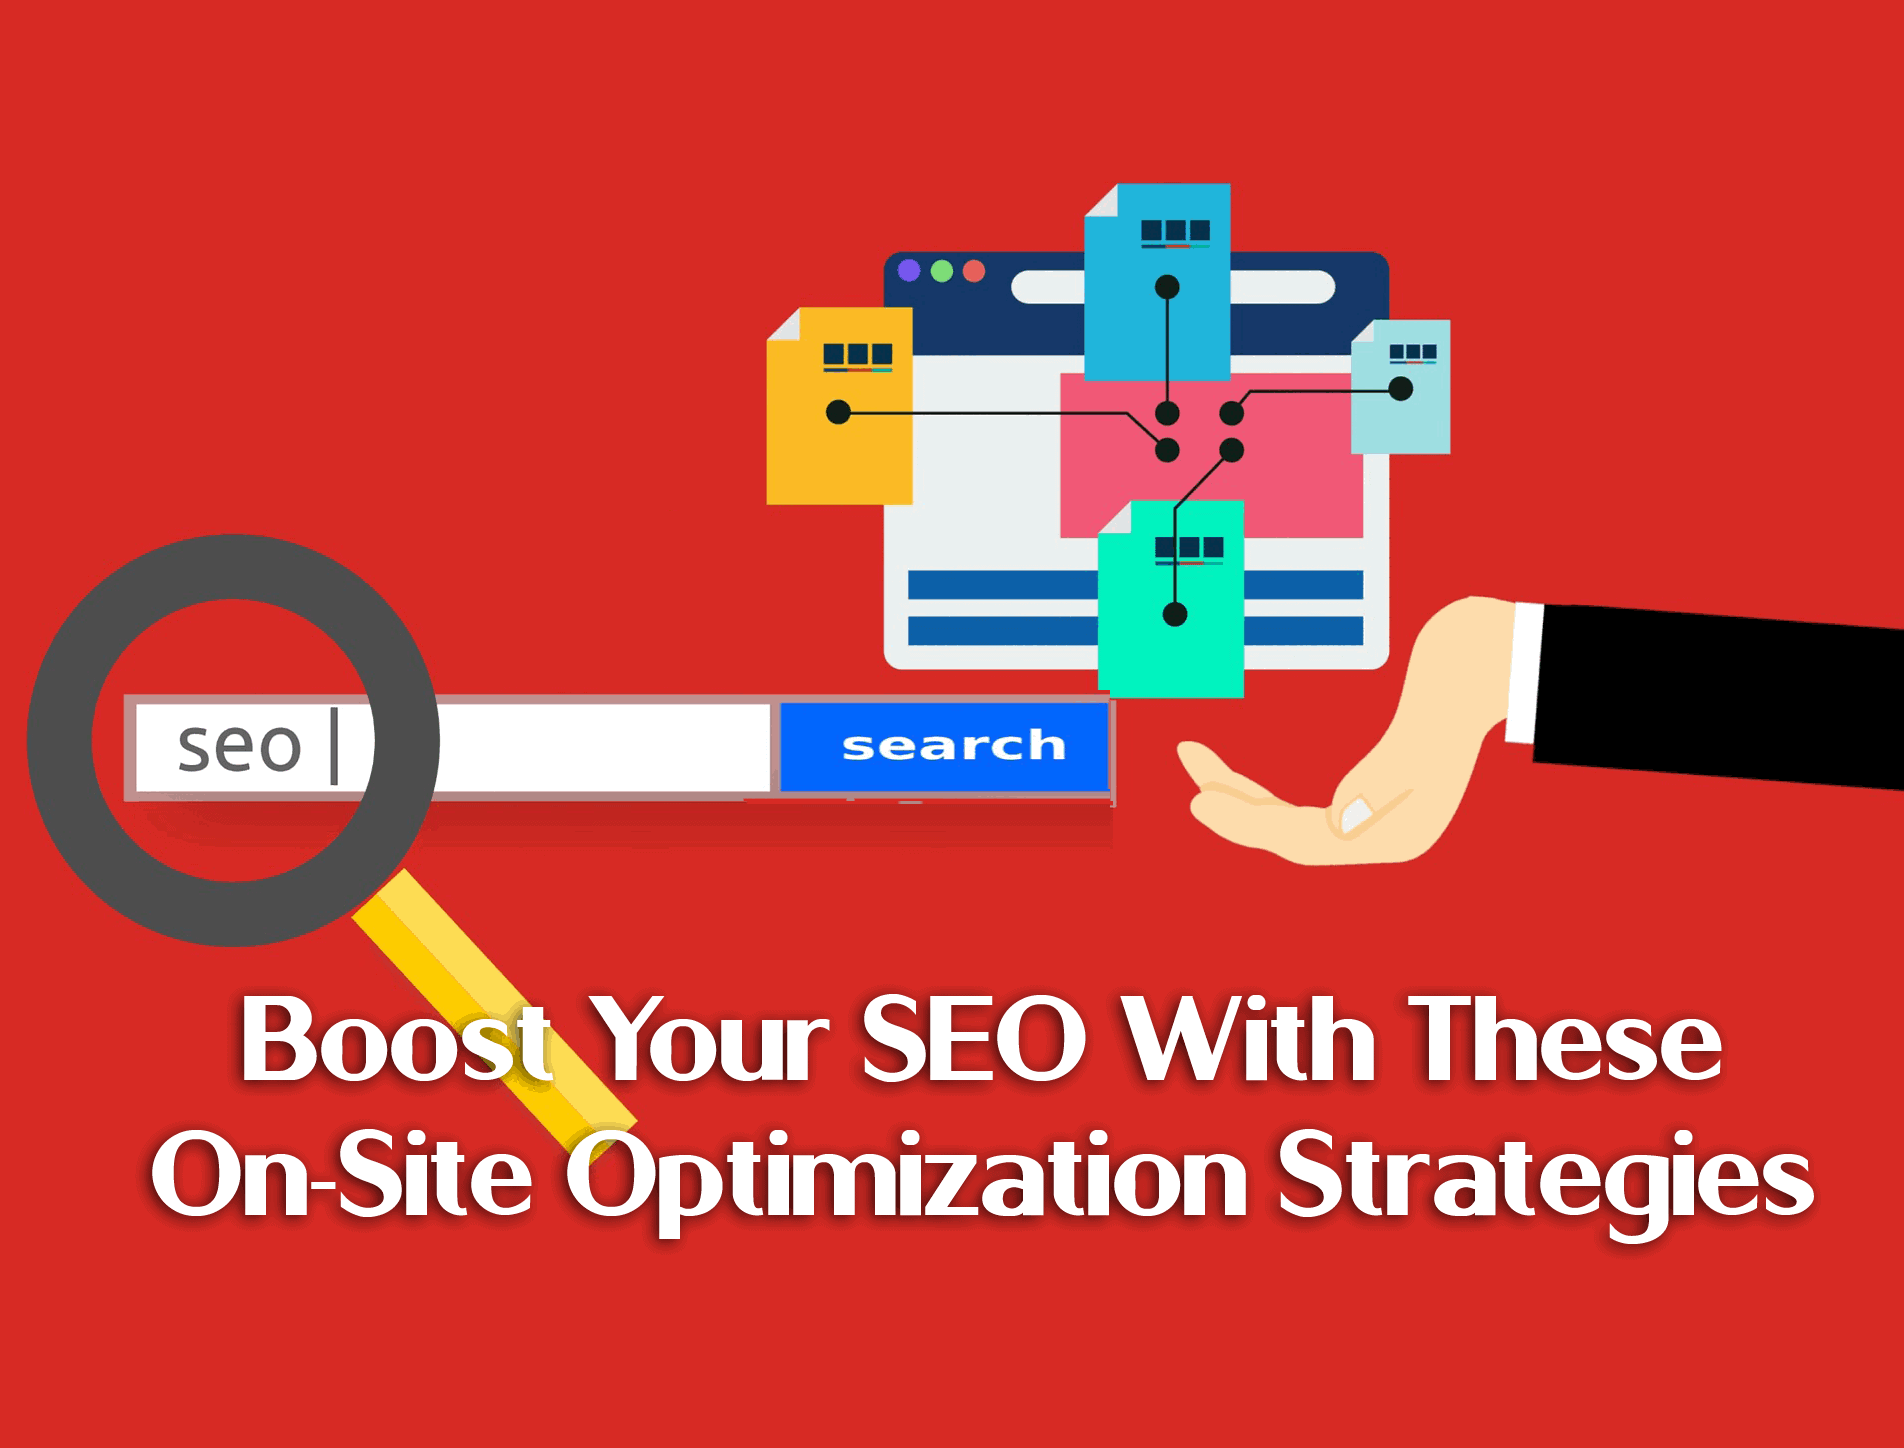 Boost Your SEO With These On-Site Optimization Strategies